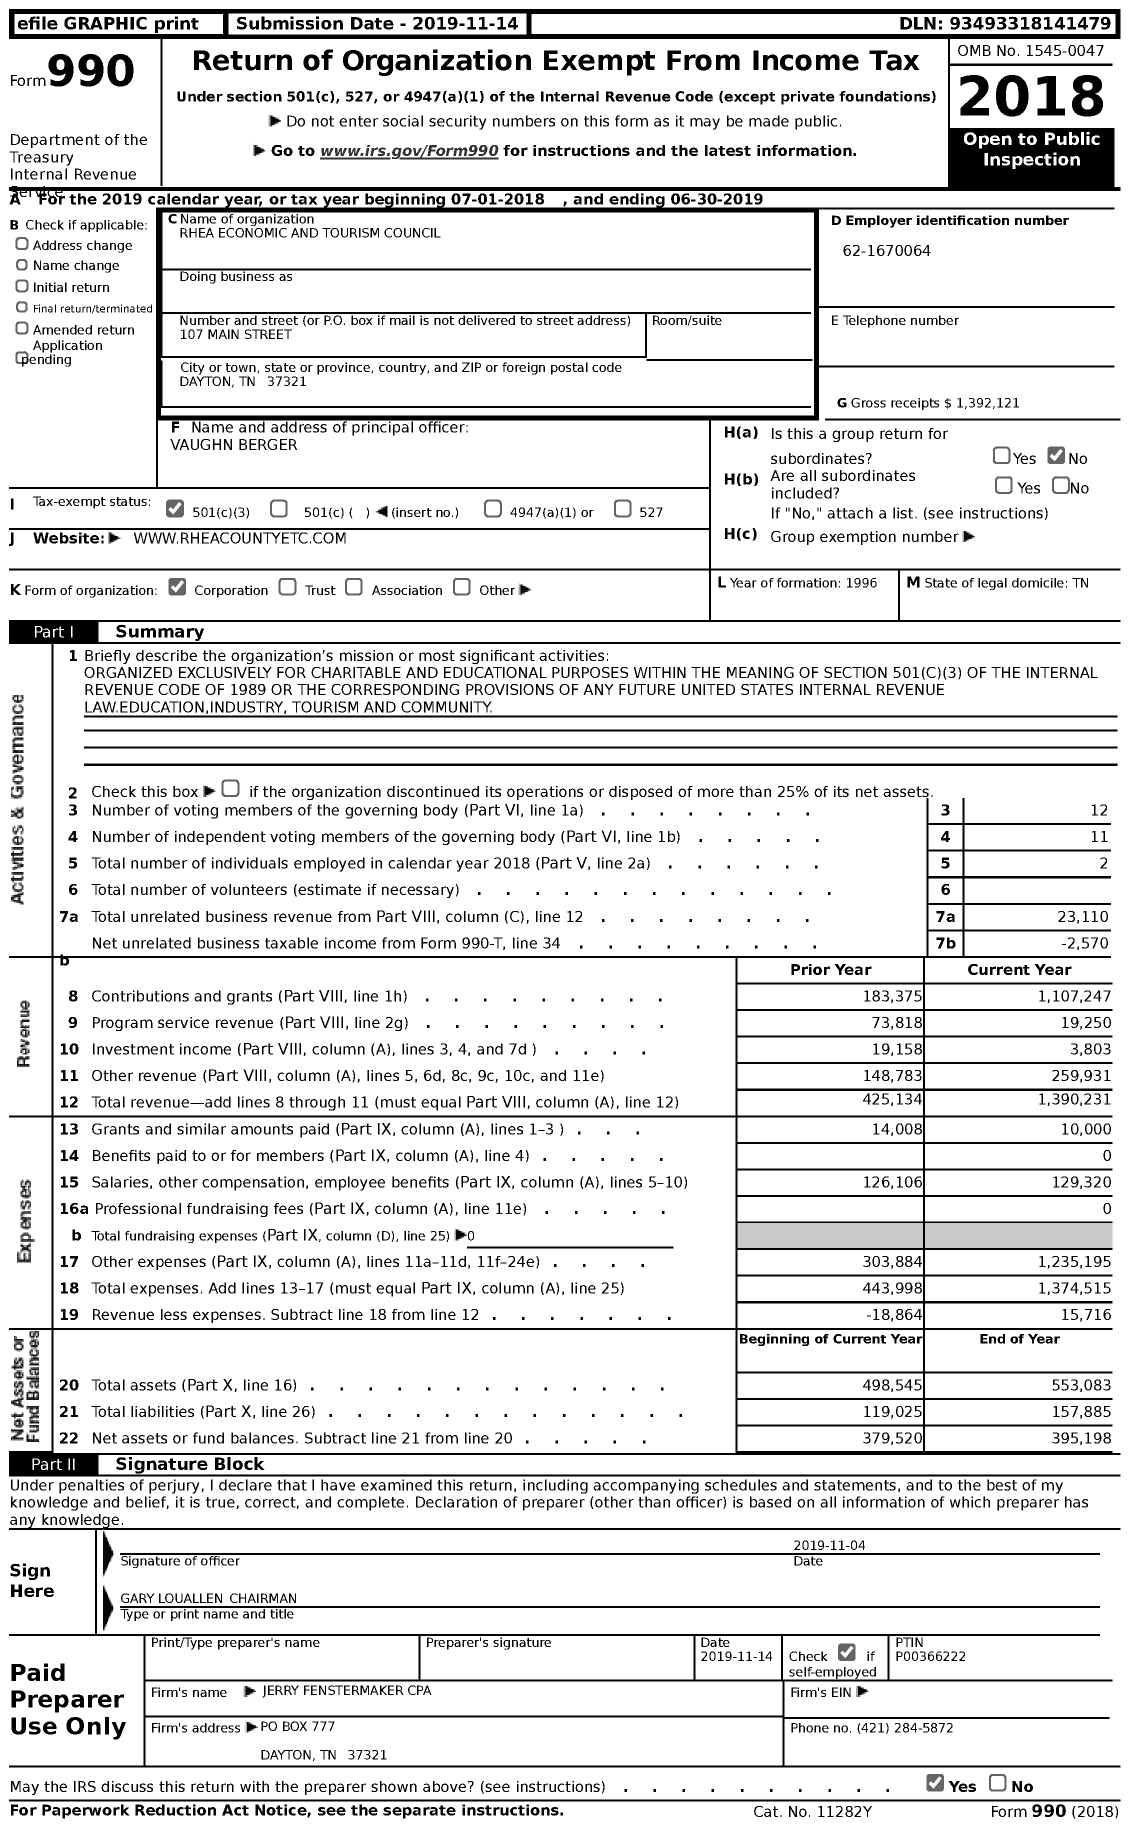 Image of first page of 2018 Form 990 for Rhea Economic and Tourism Council